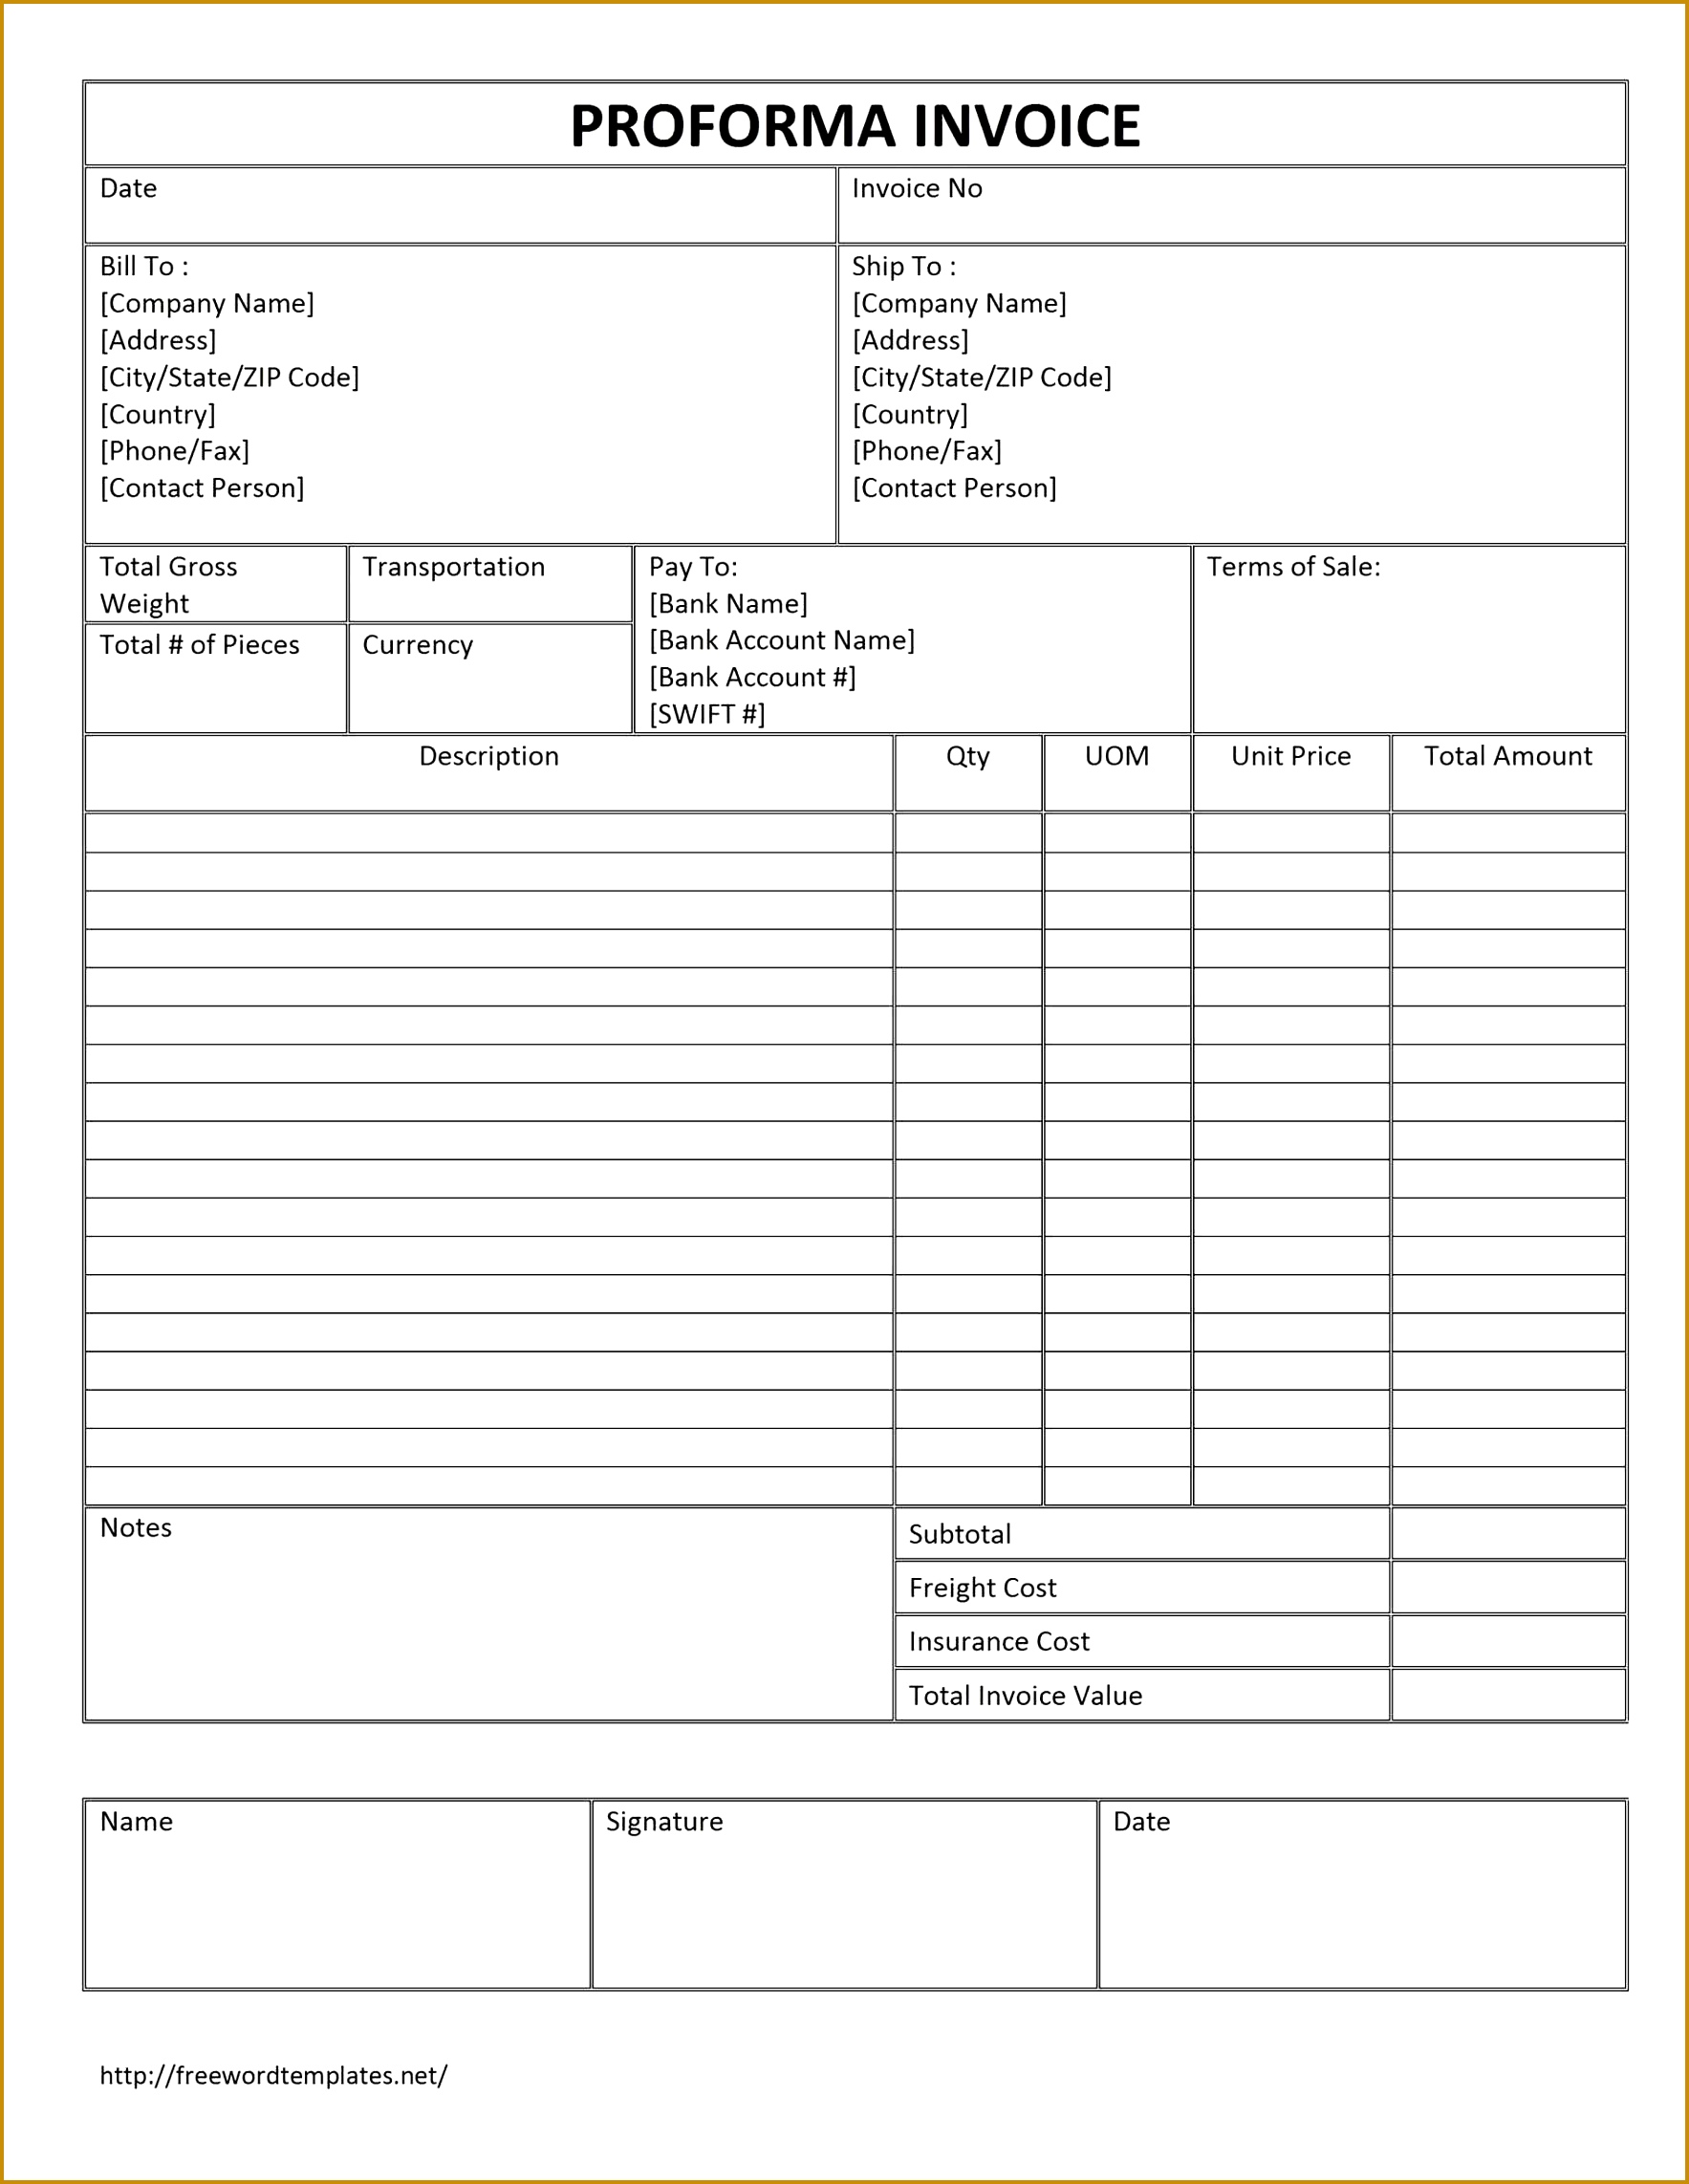 Template bill format childcare resume free excel spreadsheet templates smartsheet free Bill Quantities Excel Template 22851767